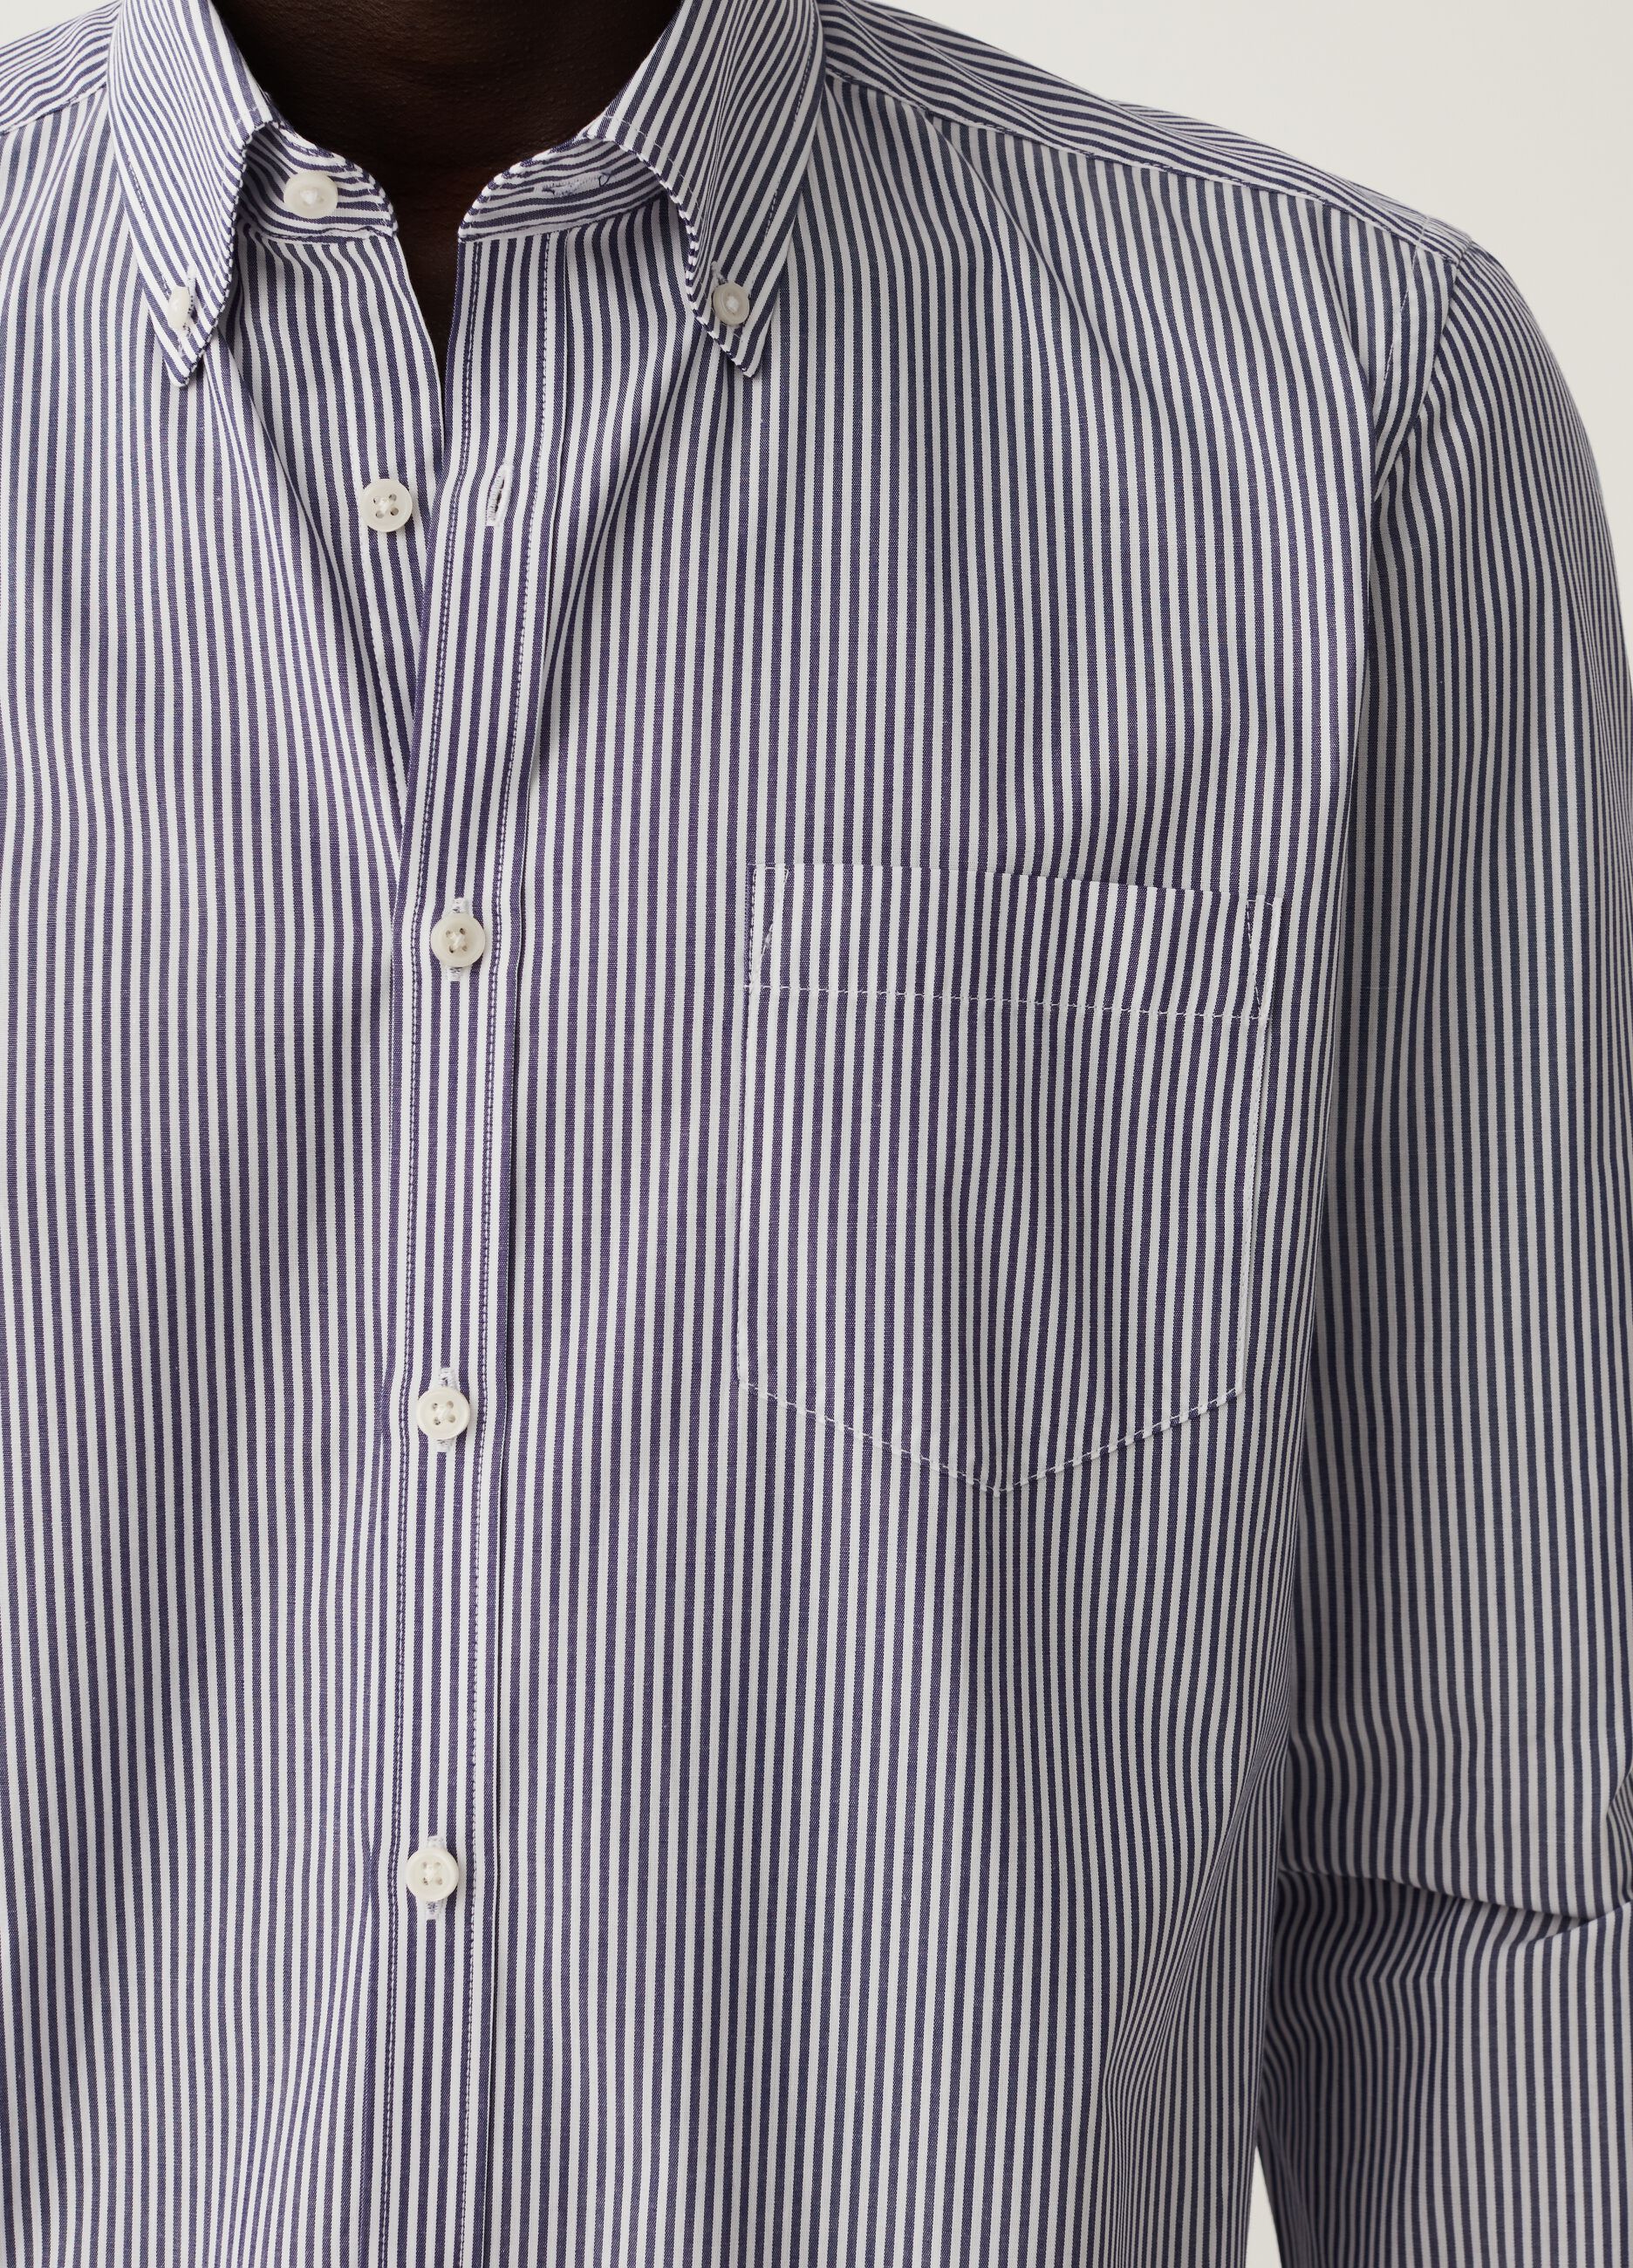 Slim-fit shirt with thin striped and pocket_3